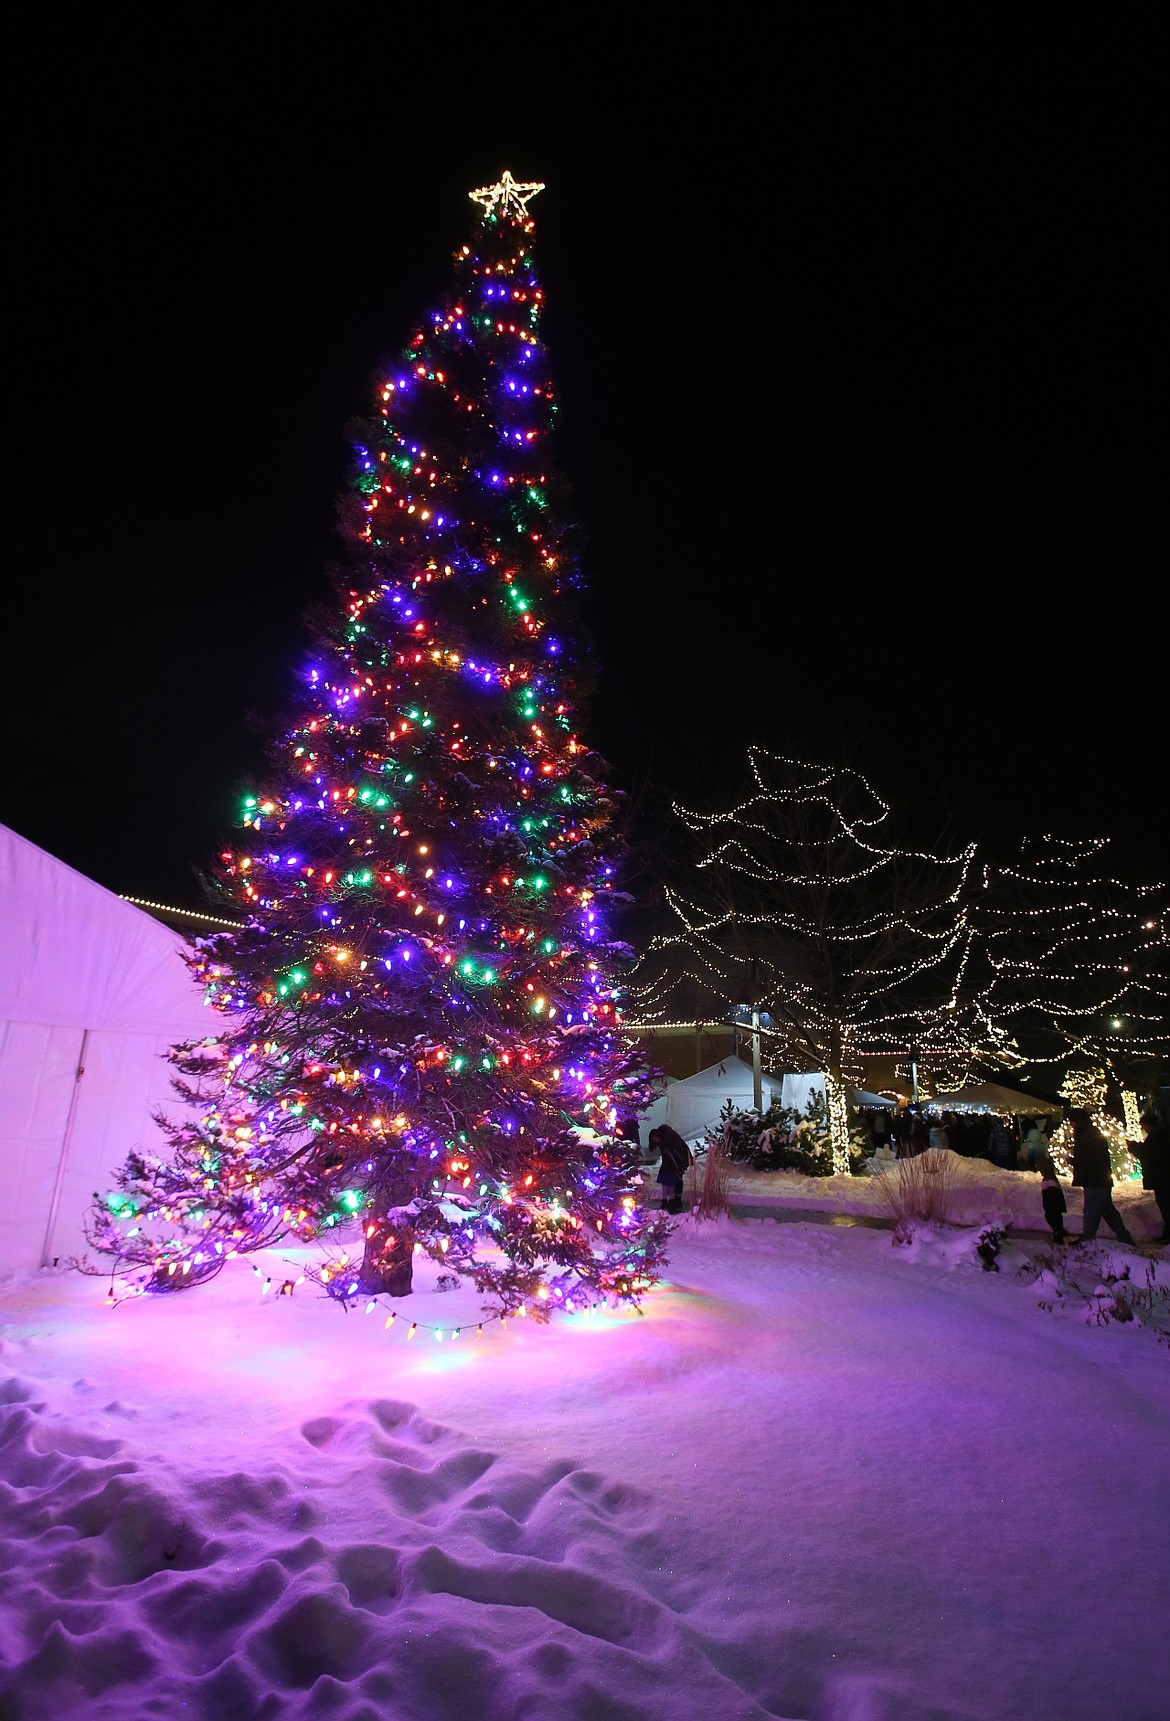 The Christmas tree at Post Falls City Hall Plaza was officially lit Friday night during Winterfest.